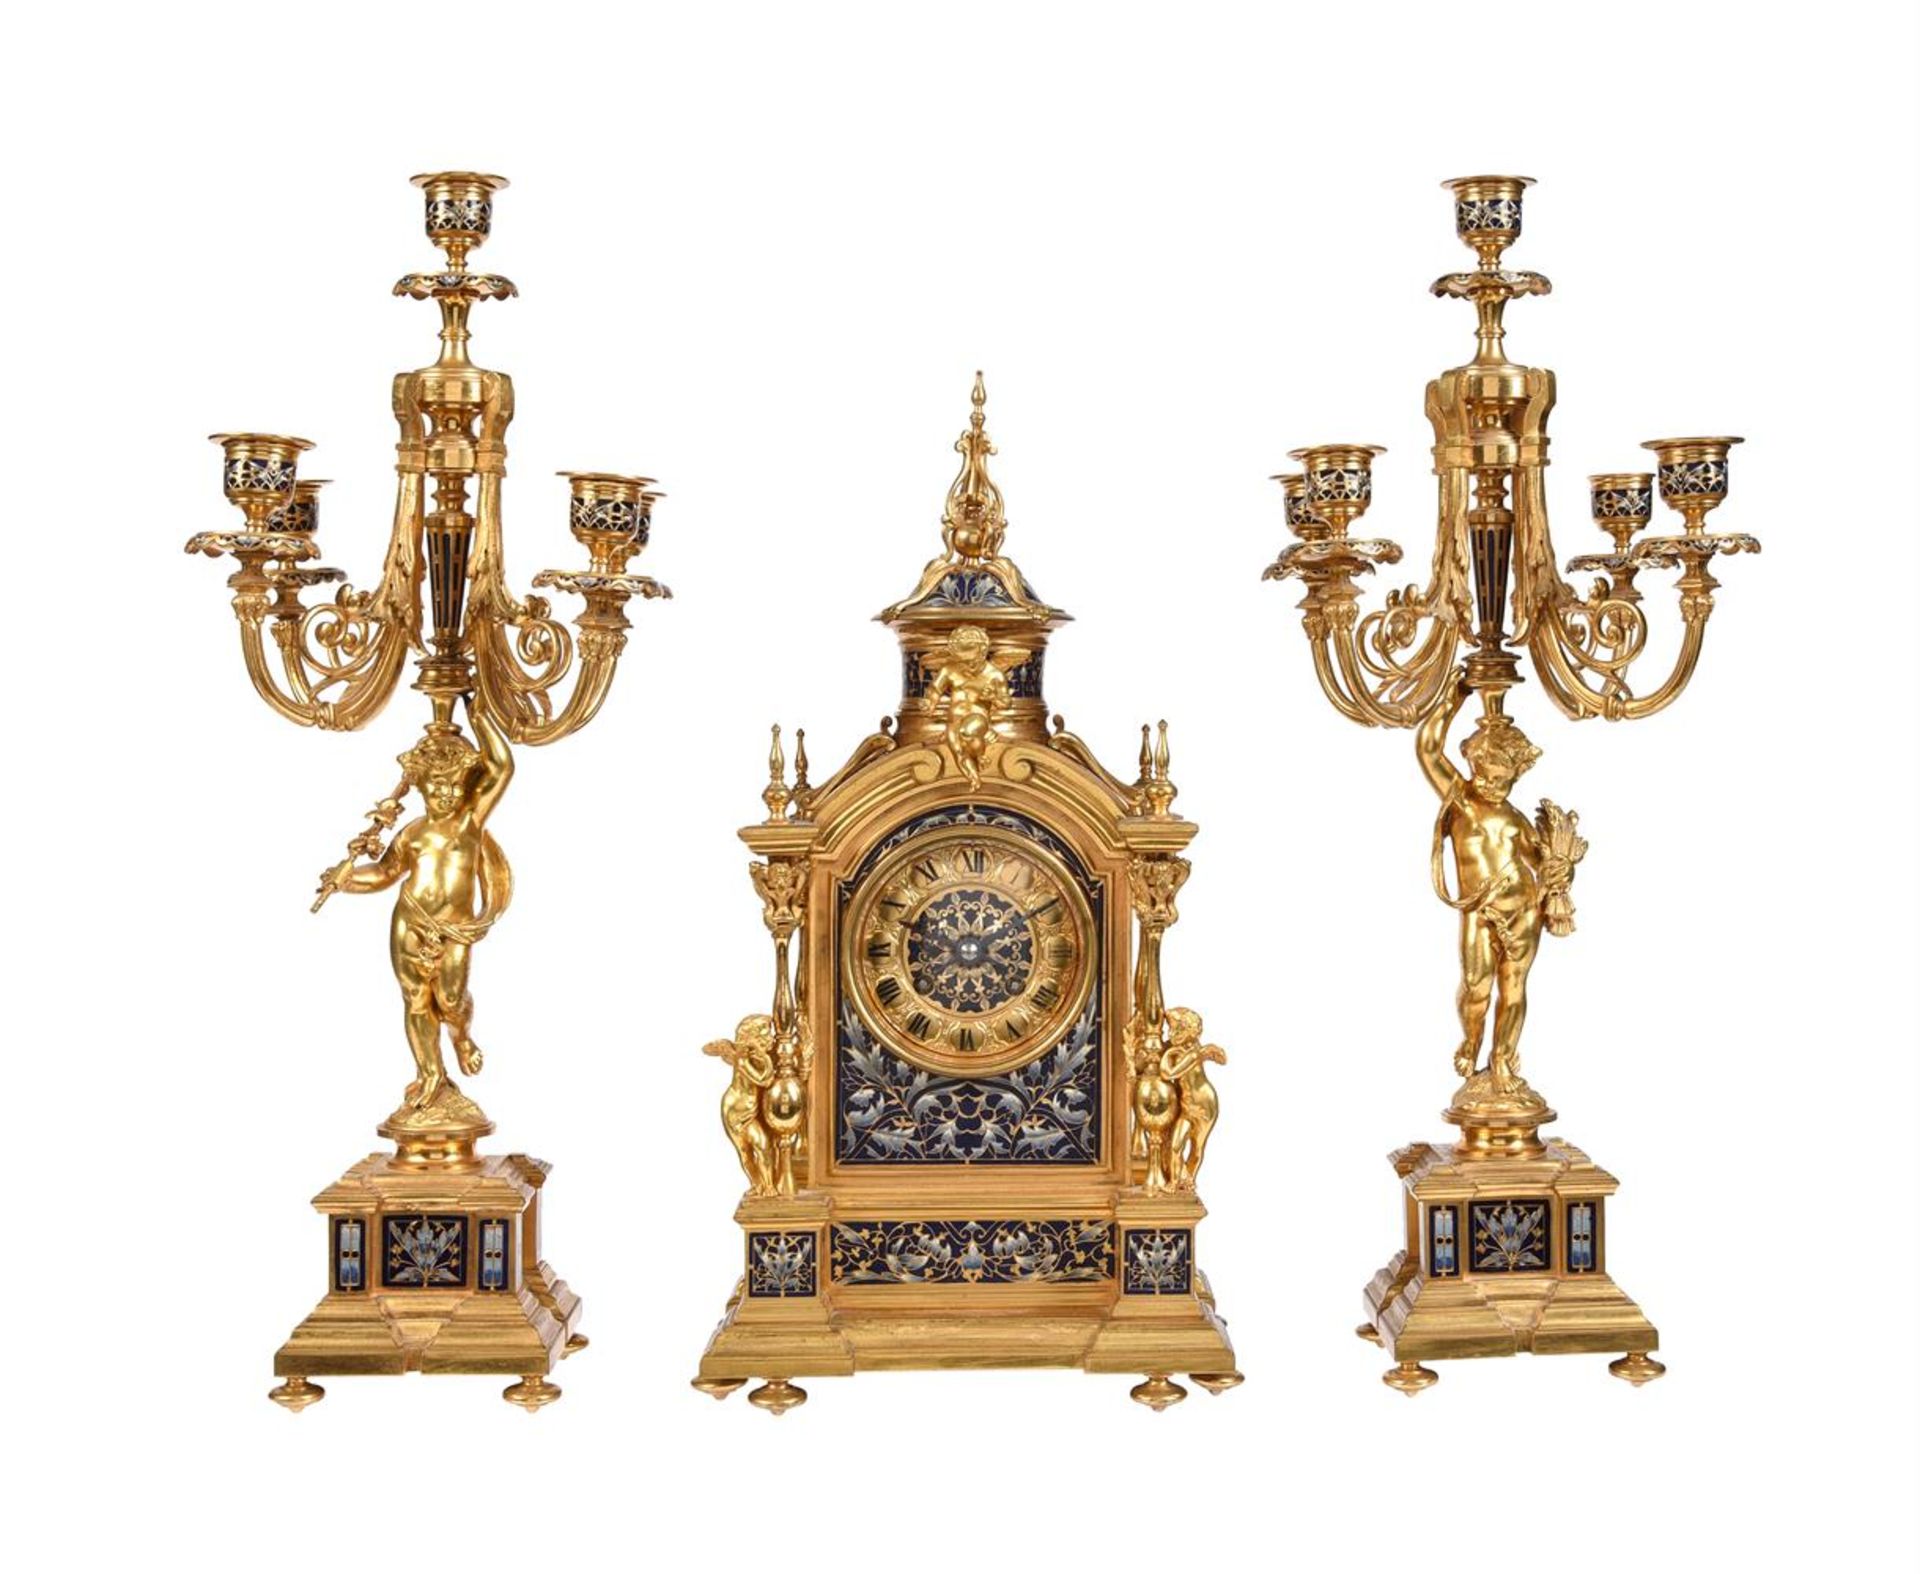 A FINE FRENCH BELLE EPOQUE GILT BRASS AND CHAMPLEVE ENAMELLED MANTEL CLOCK GARNITURE